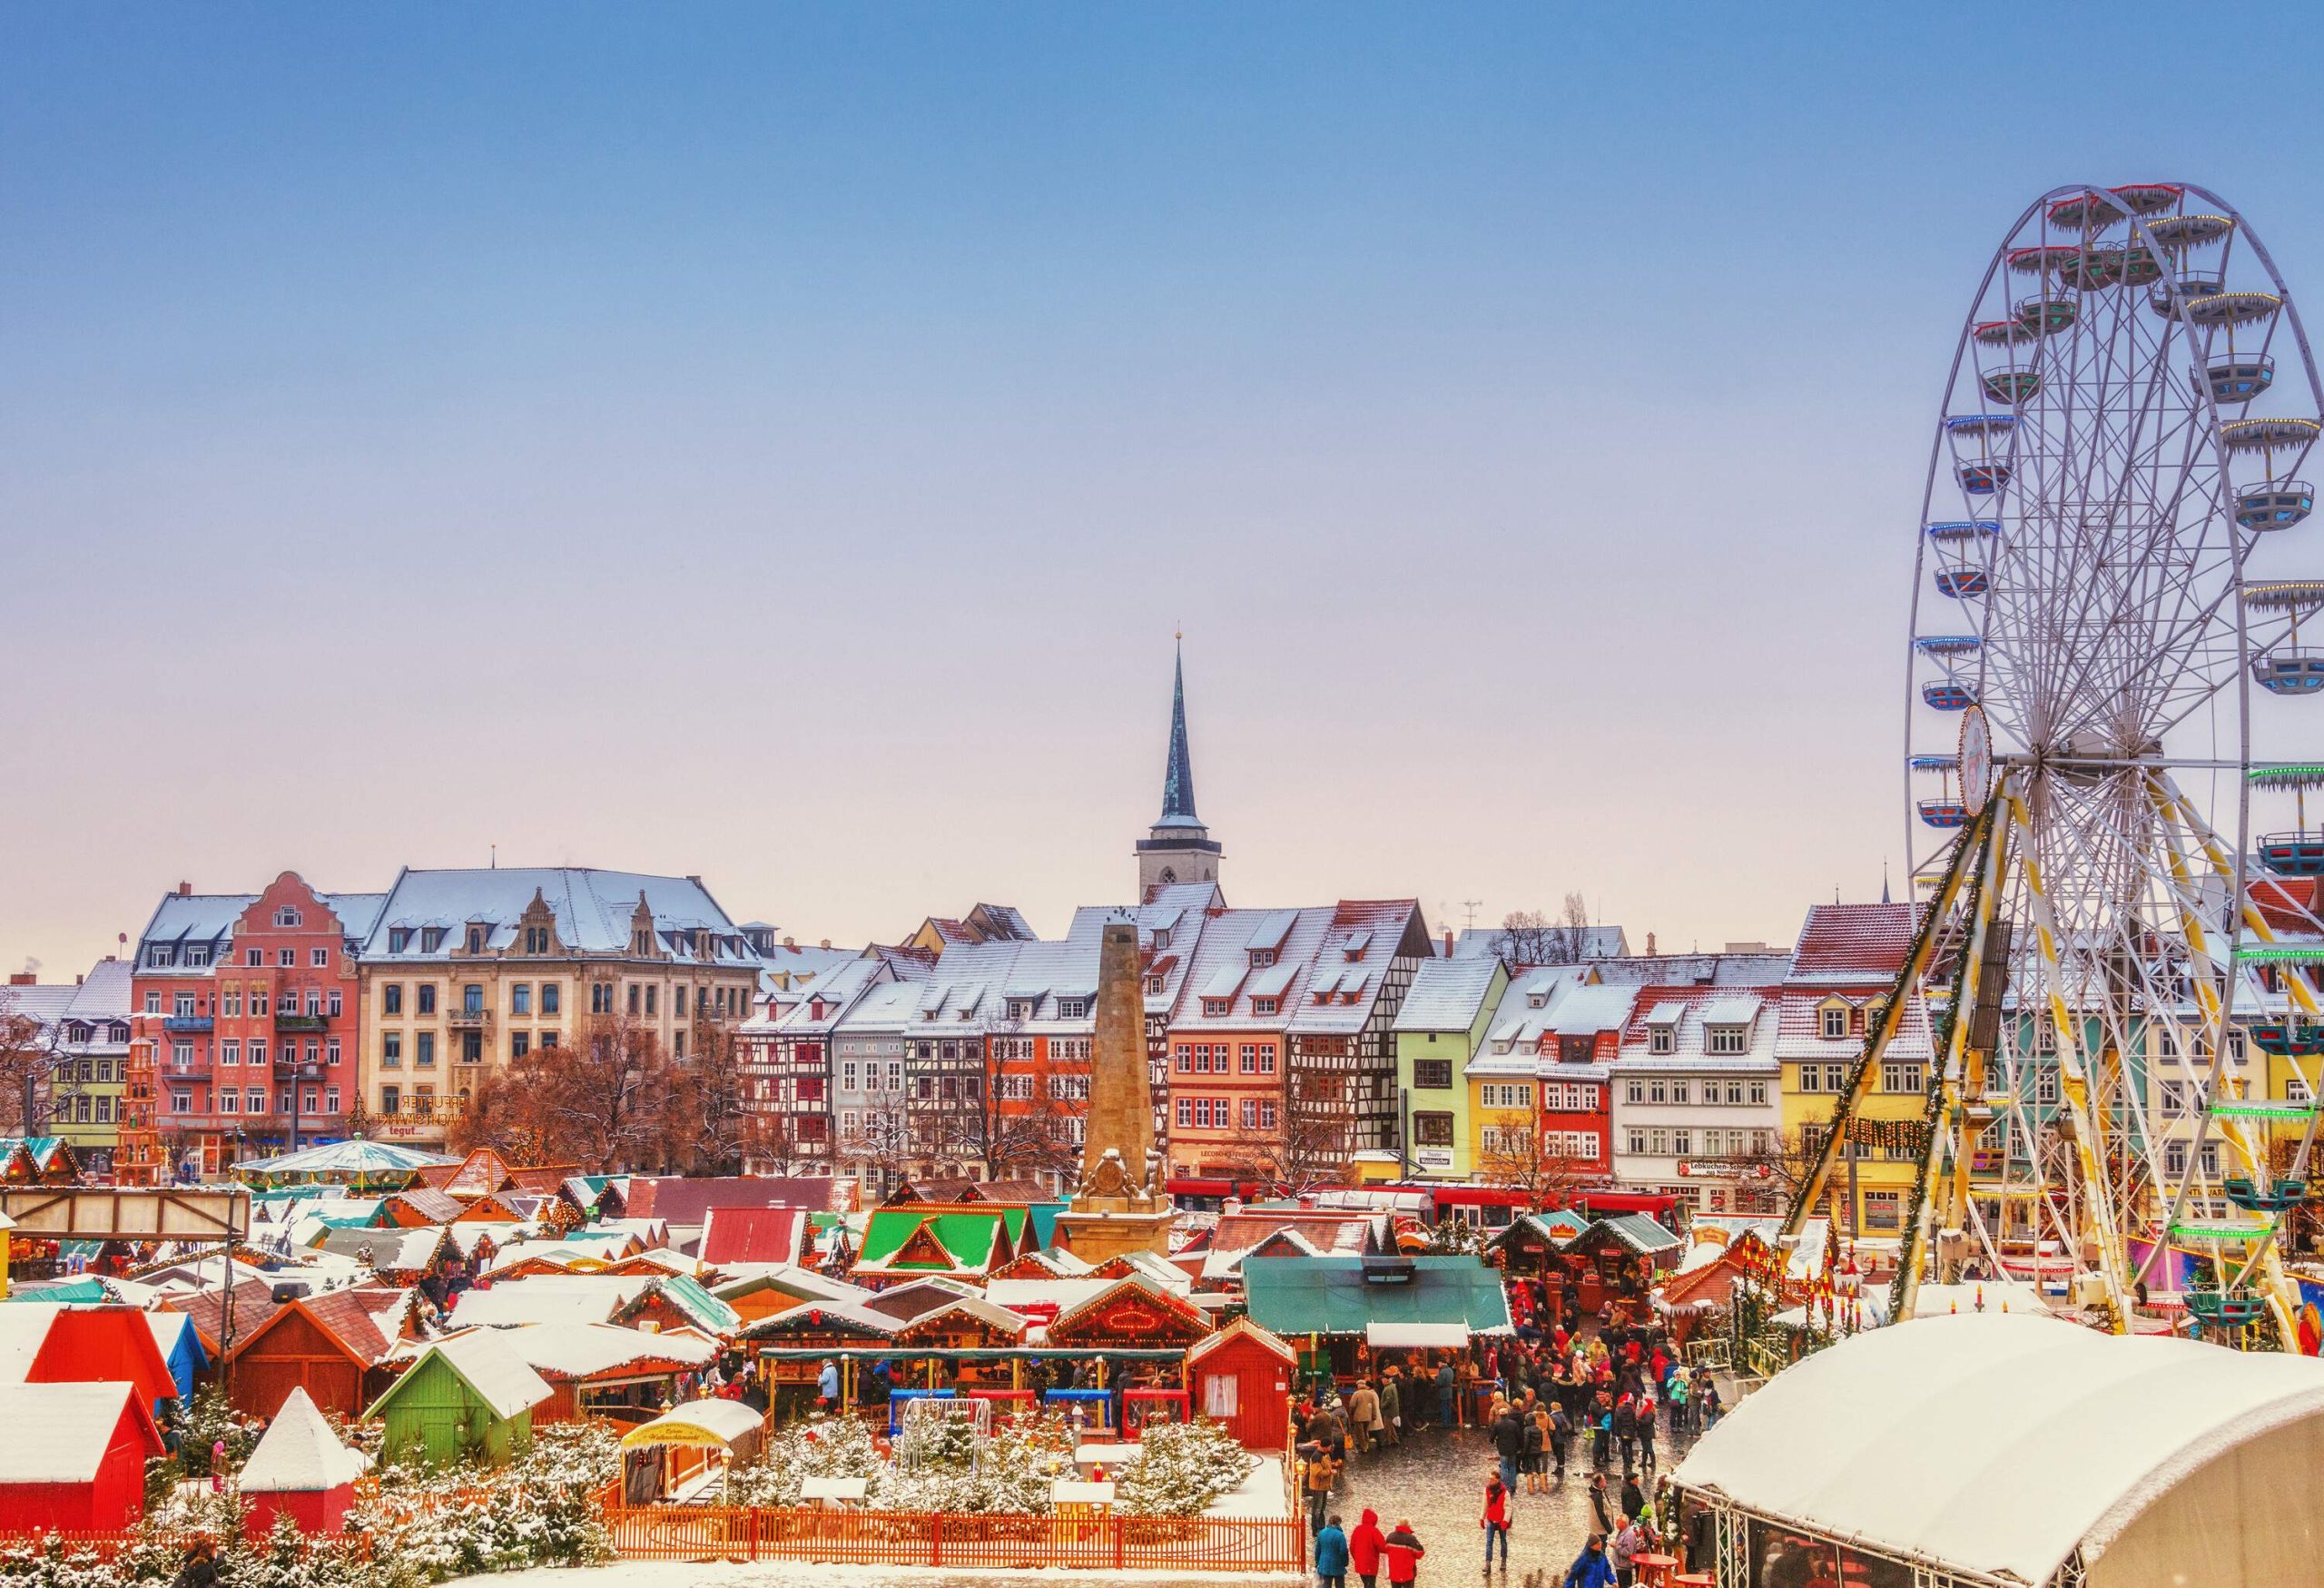 A packed Christmas market with vibrant stalls, a Ferris wheel, and colourful buildings in the backdrop.